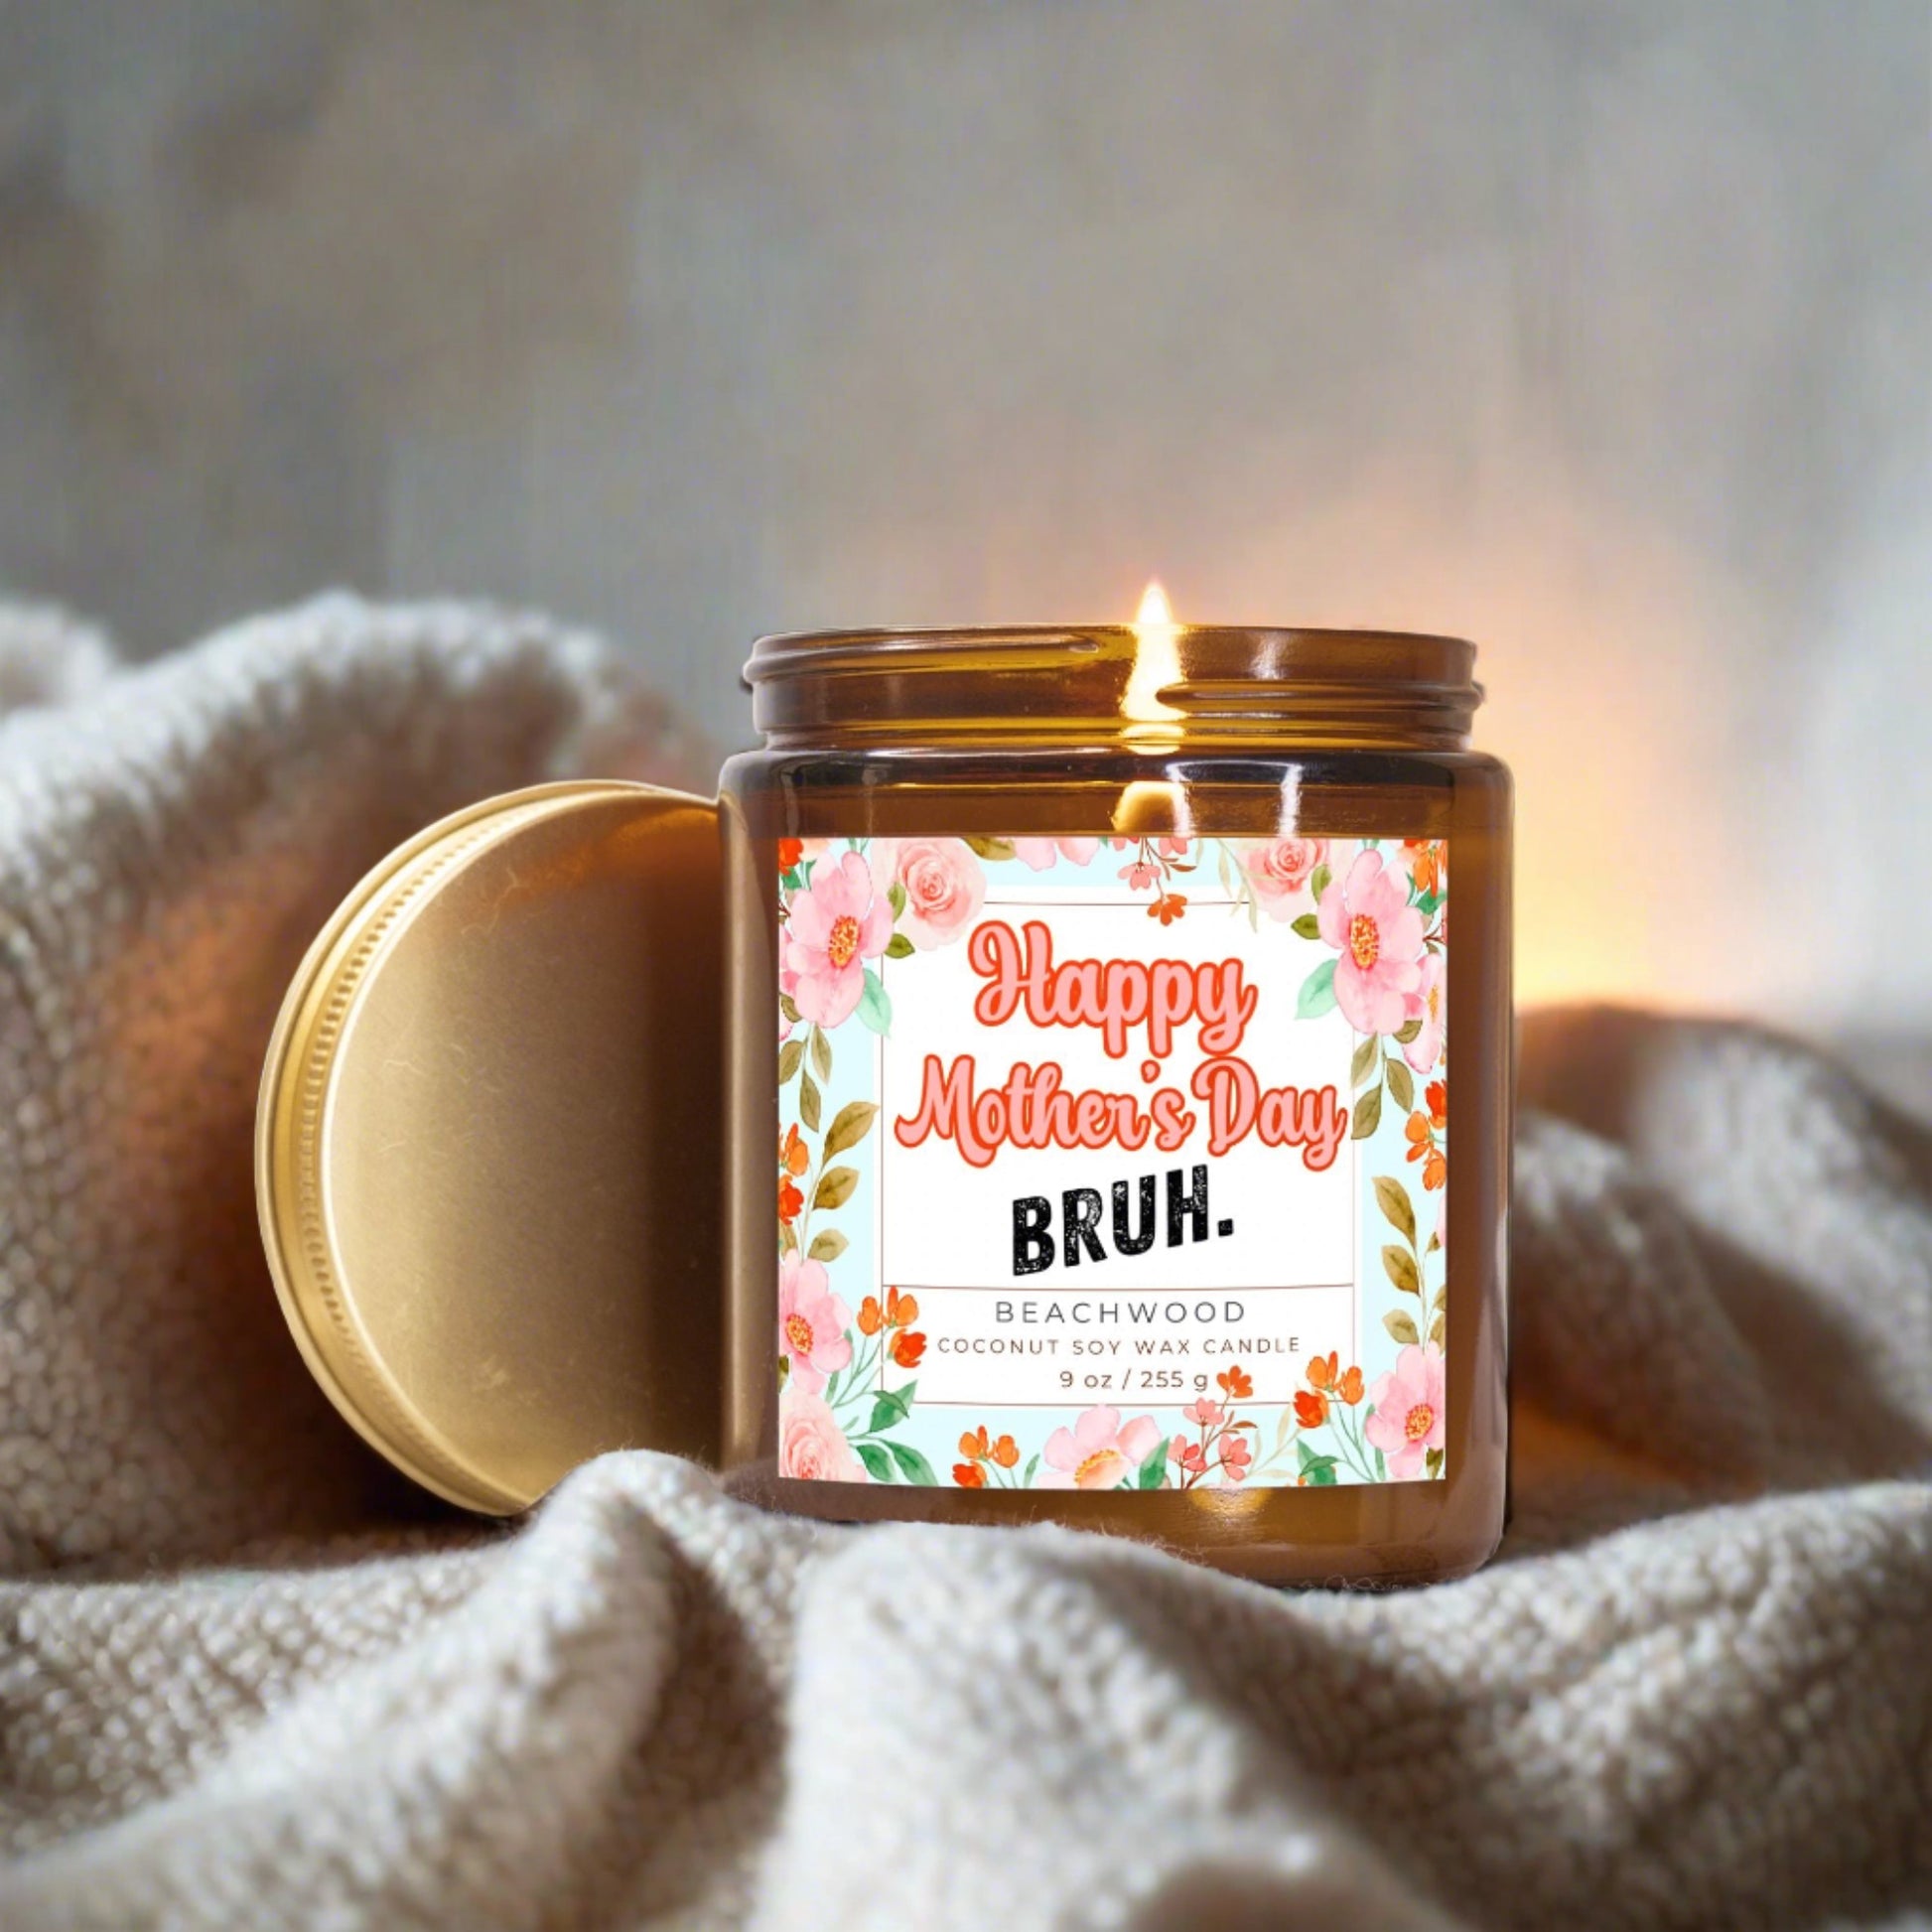 amber 9 oz candle for mother's day, snarky fun humor for mom